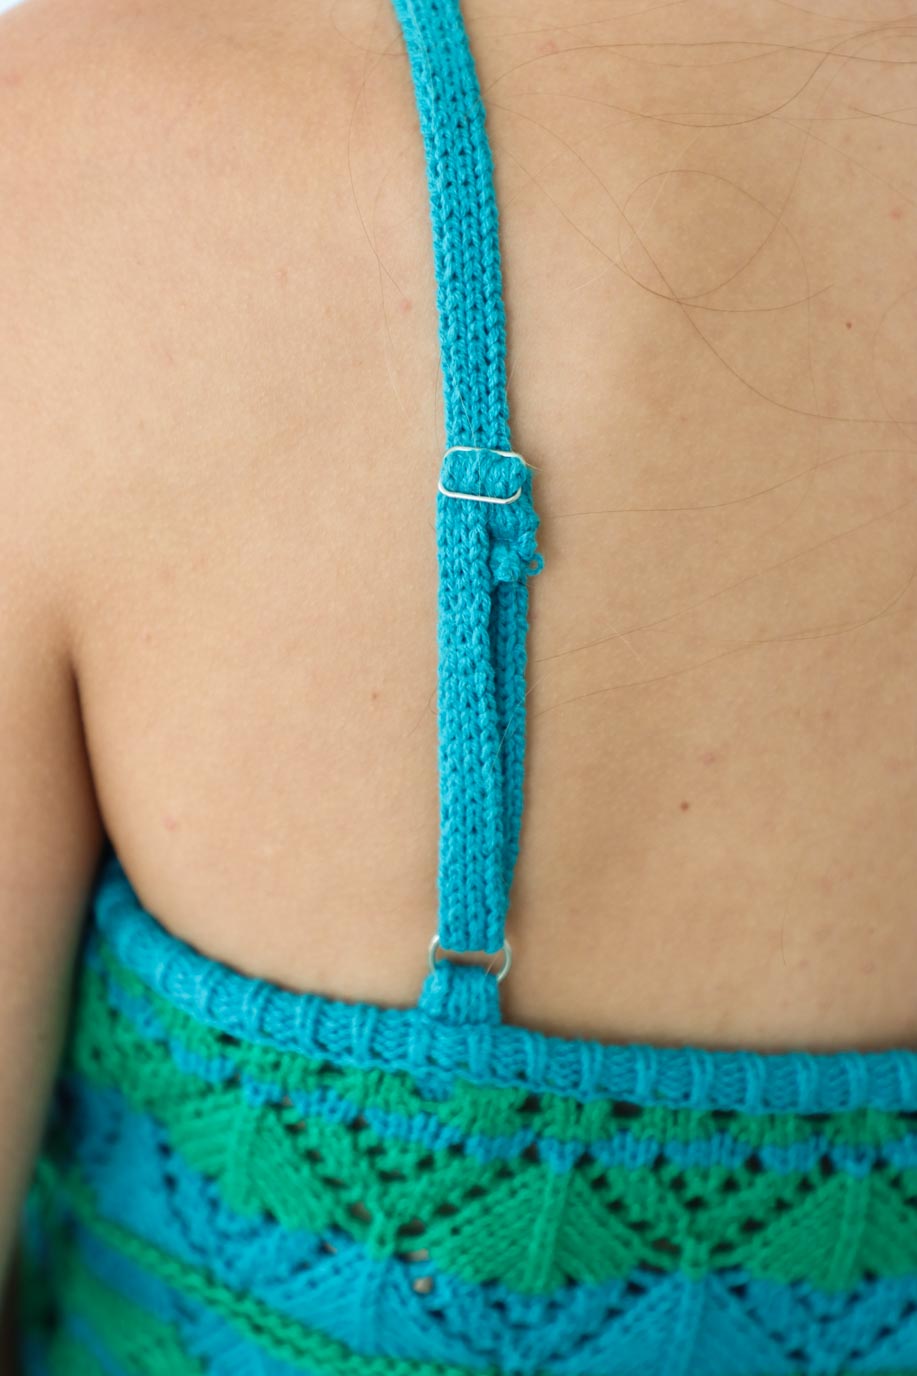 How to Crochet an Adjustable Strap 